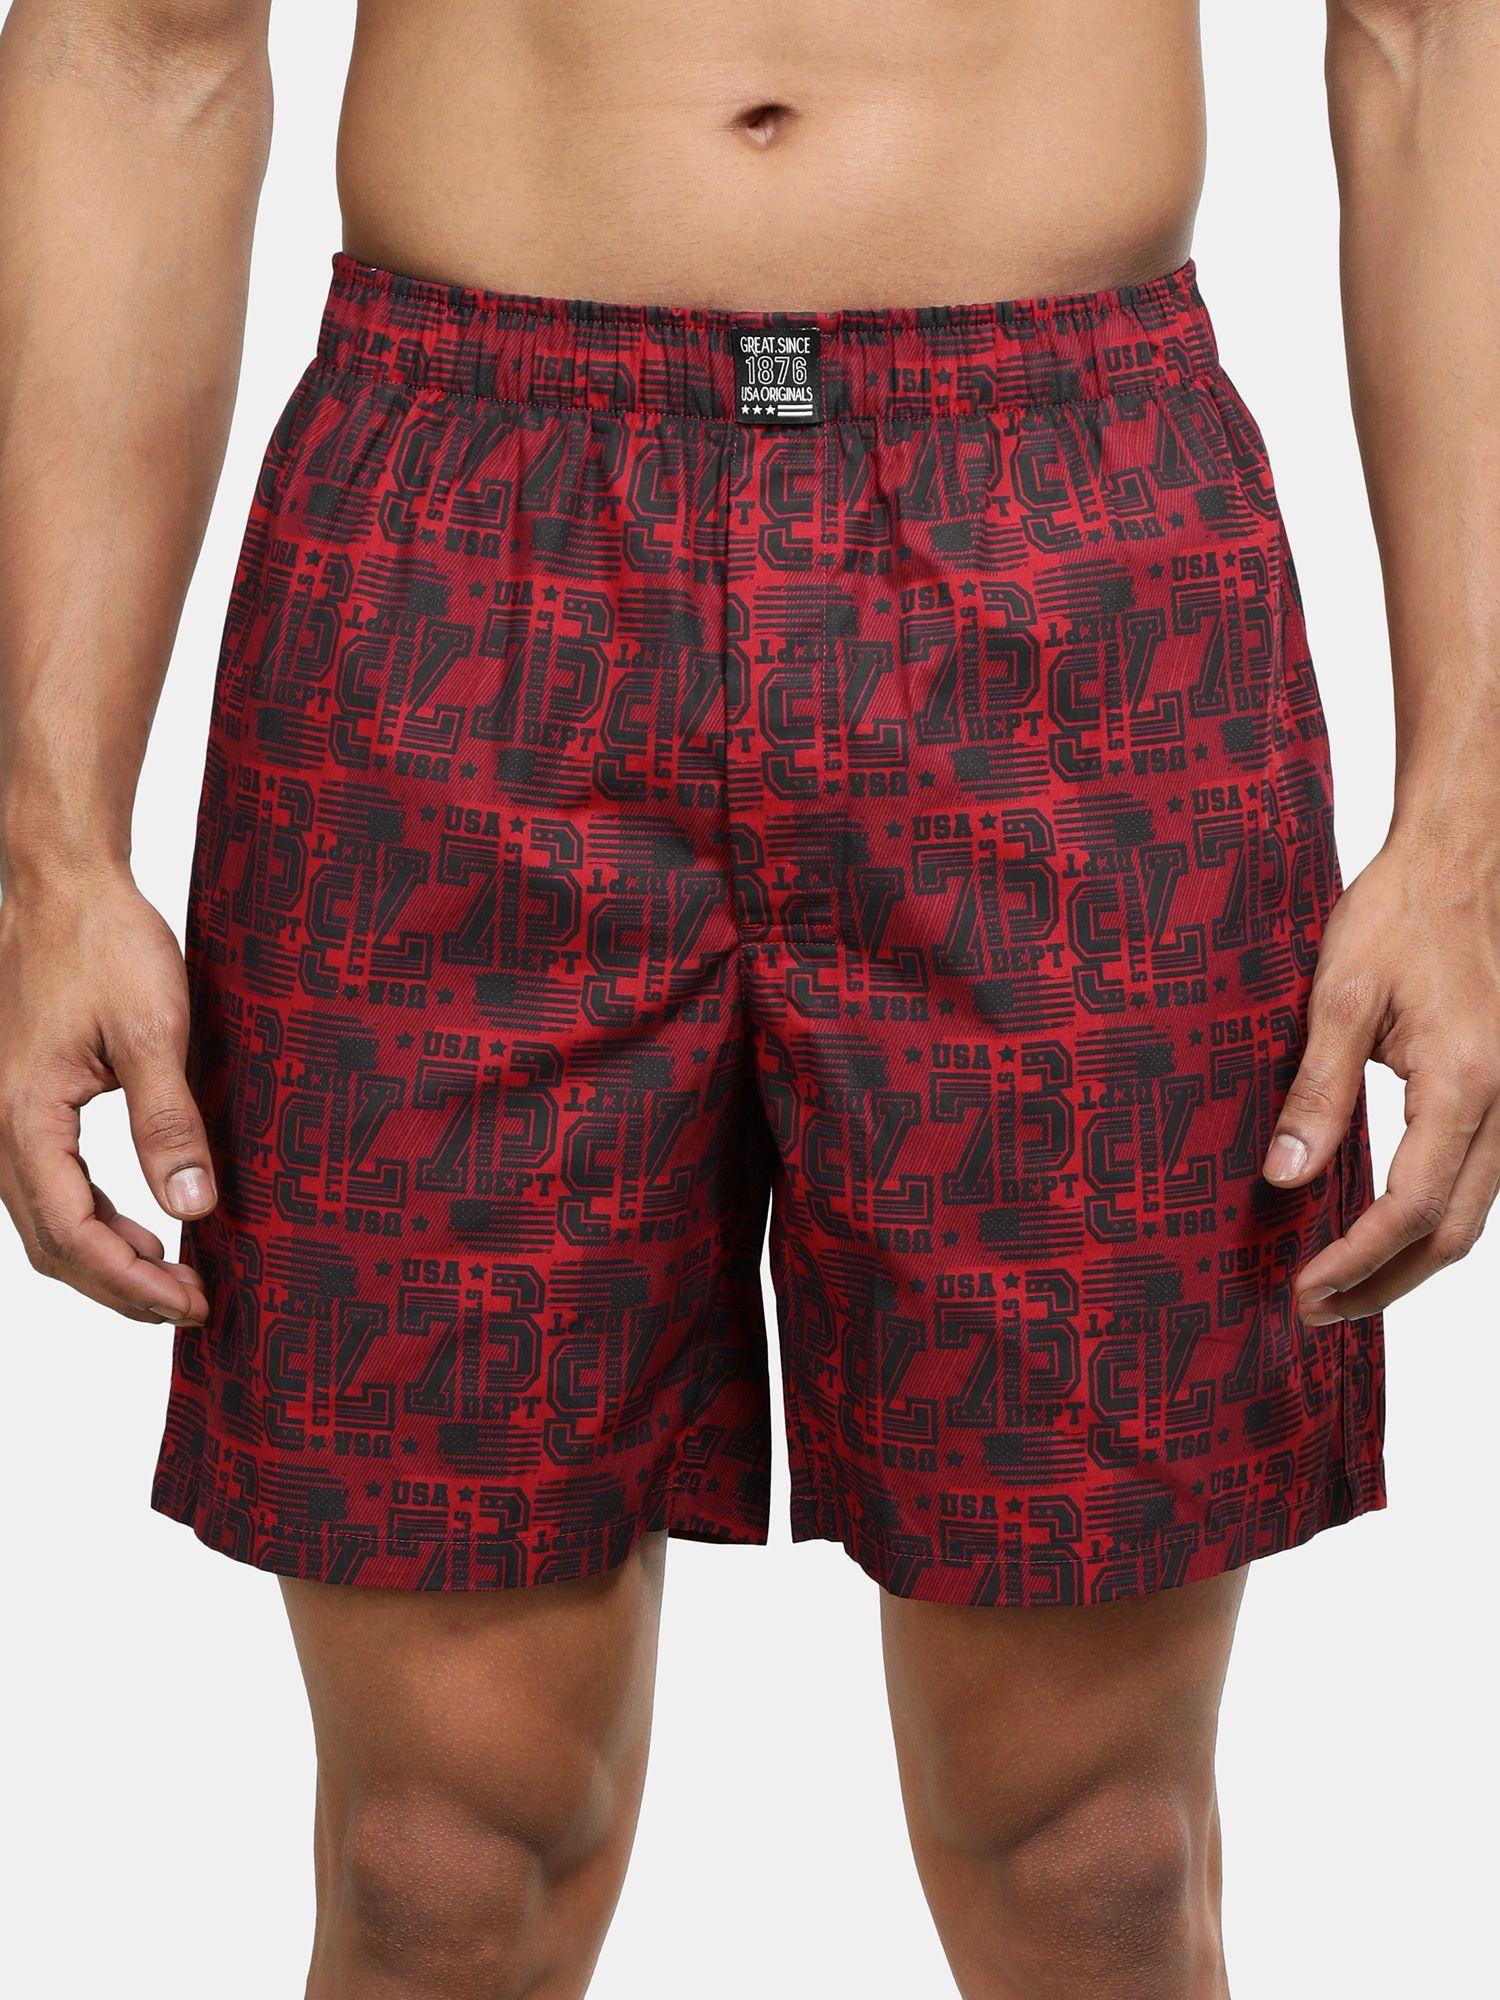 us57 mens mercerized cotton woven printed boxer shorts with side pocket - brick red